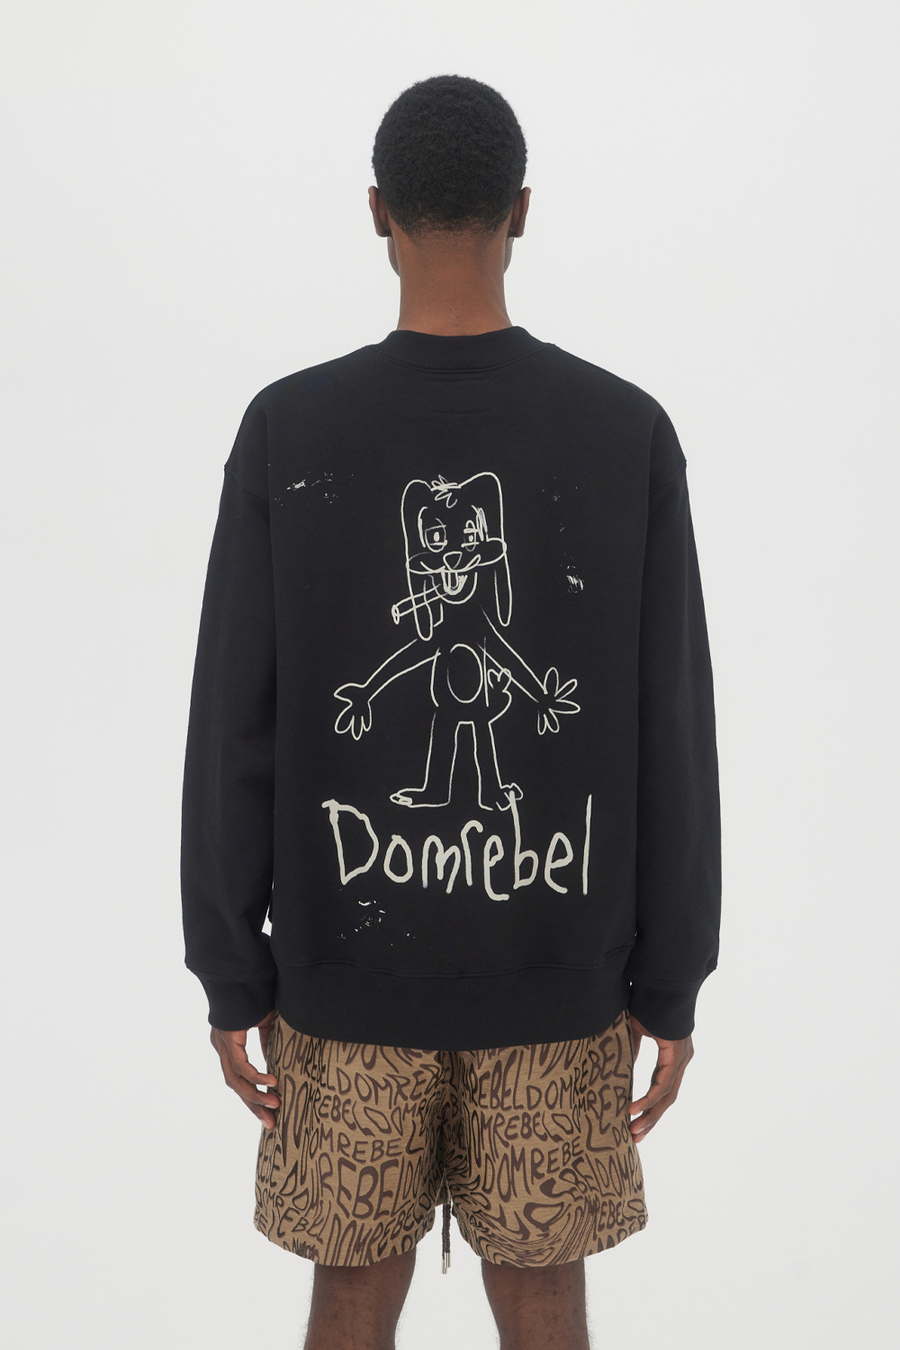 Buy the Domrebel Willy Sweatshirt Black at Intro. Spend £50 for free UK delivery. Official stockists. We ship worldwide.